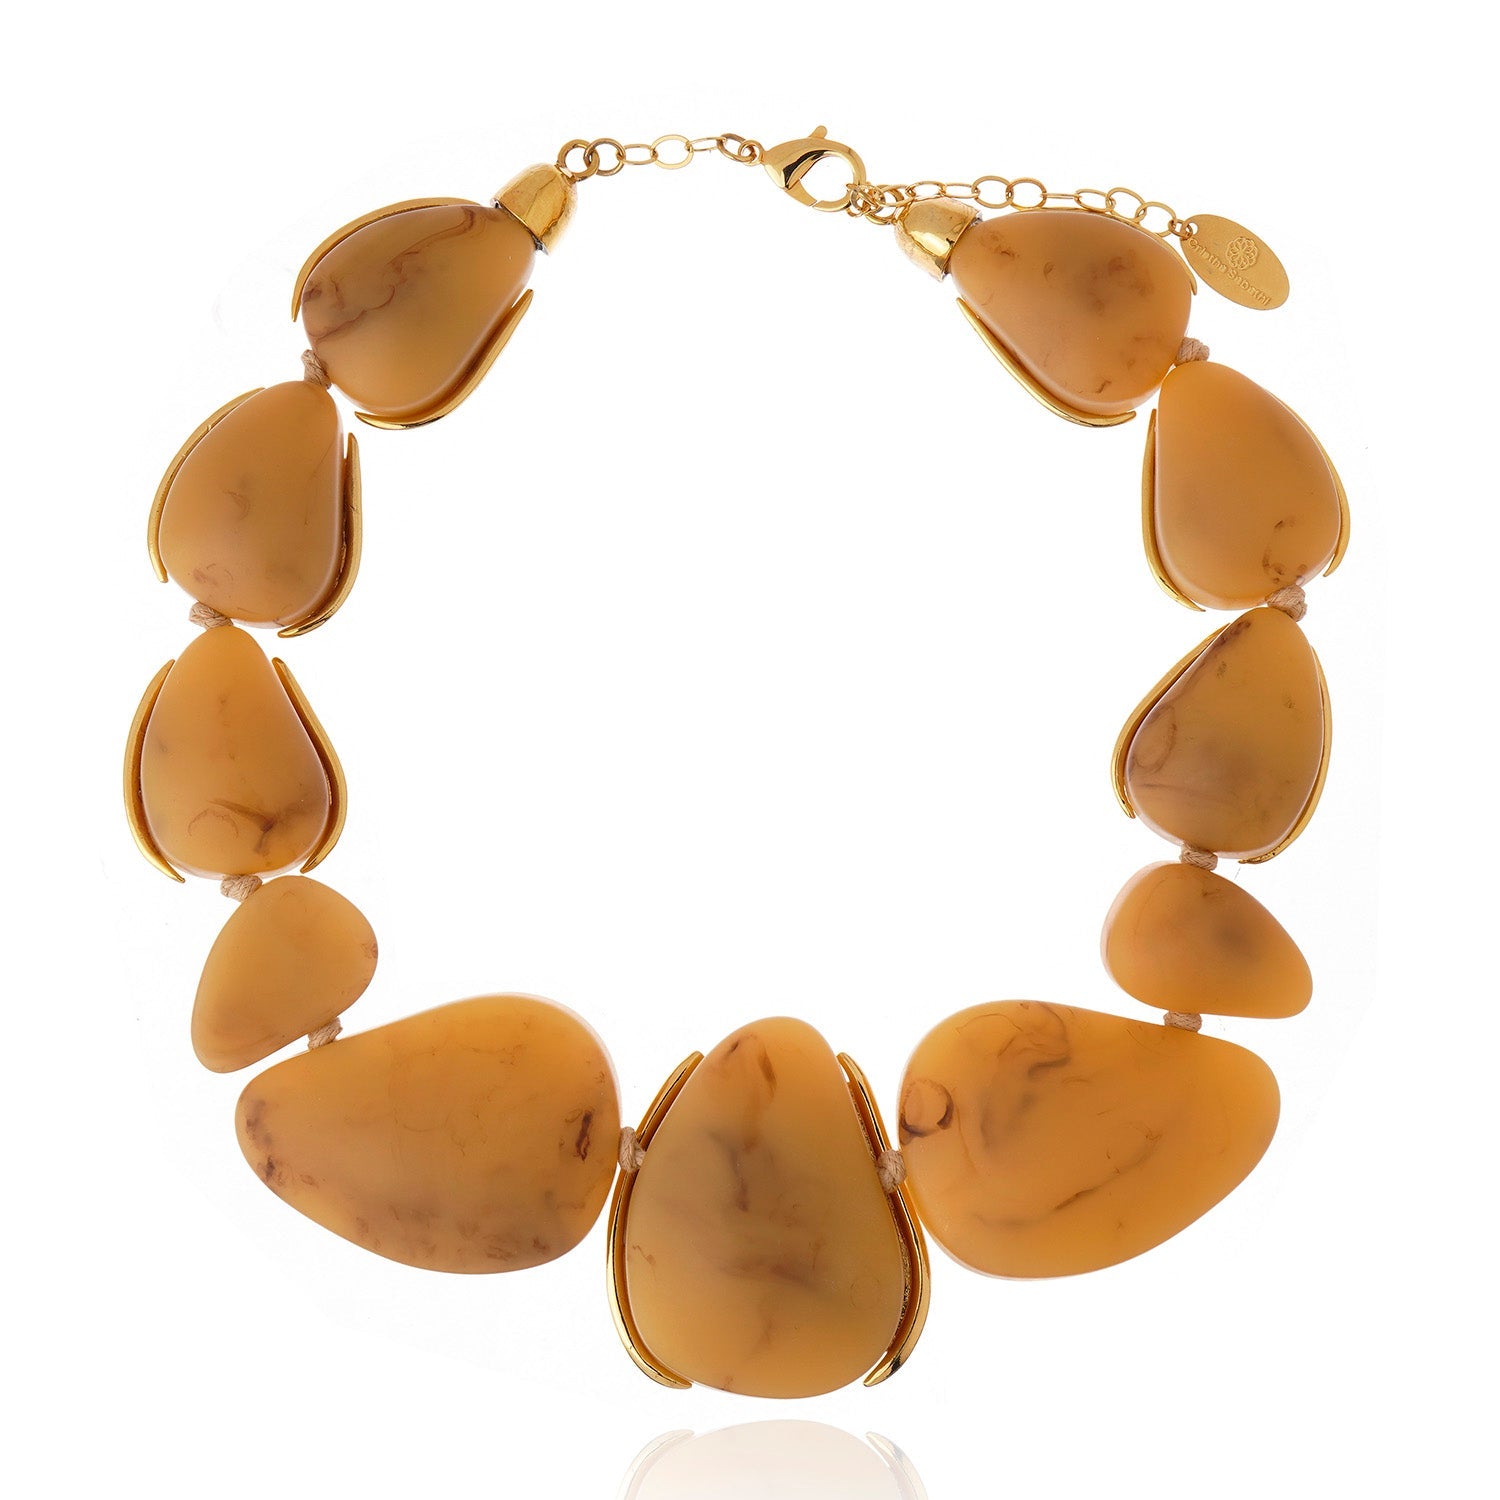 Organic Concept Resin Necklace - Beige